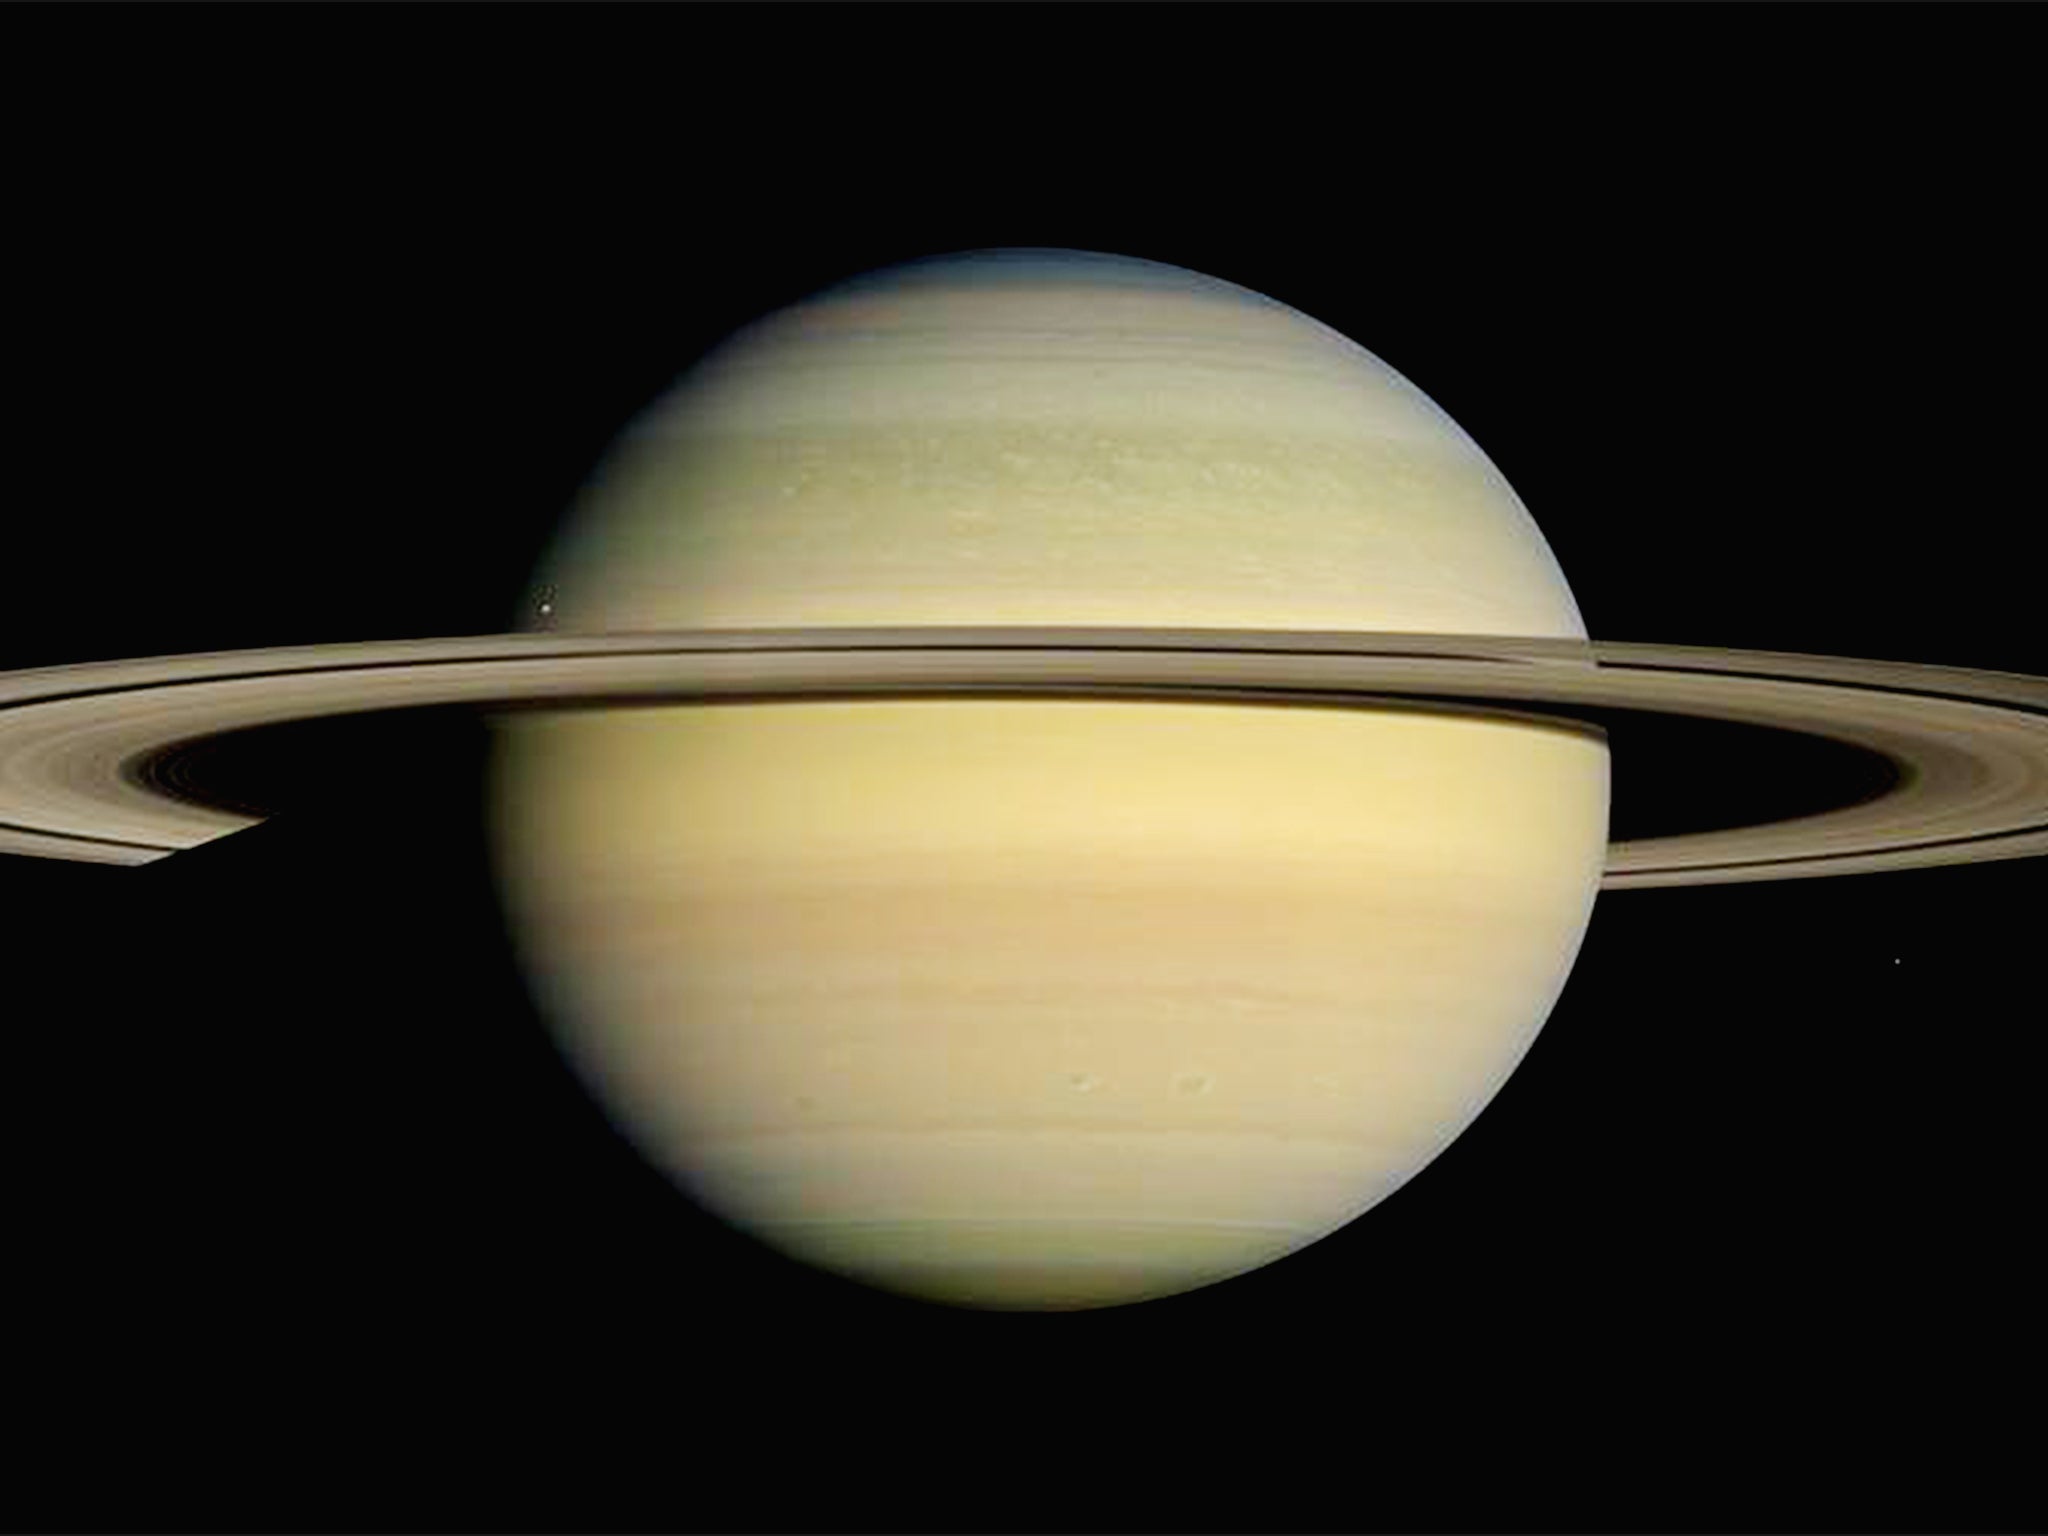 Saturn is girdled by brilliant appendages that would stretch almost all the way from the Earth to the Moon